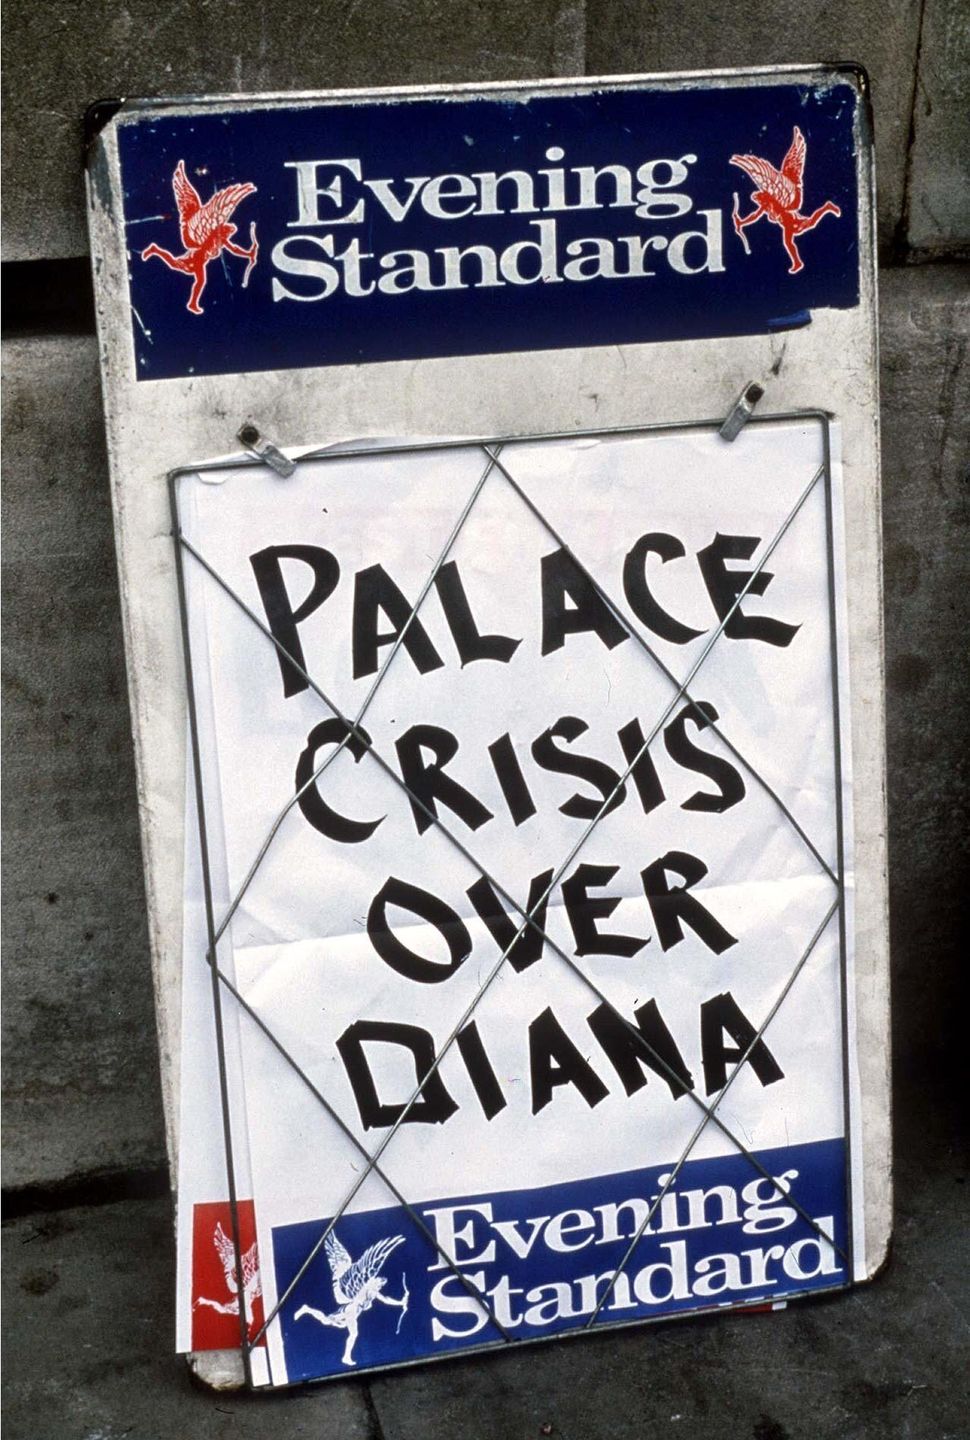 The palace was left reeling after the interview was broadcast - as this Evening Standard sign from 1995 implies 